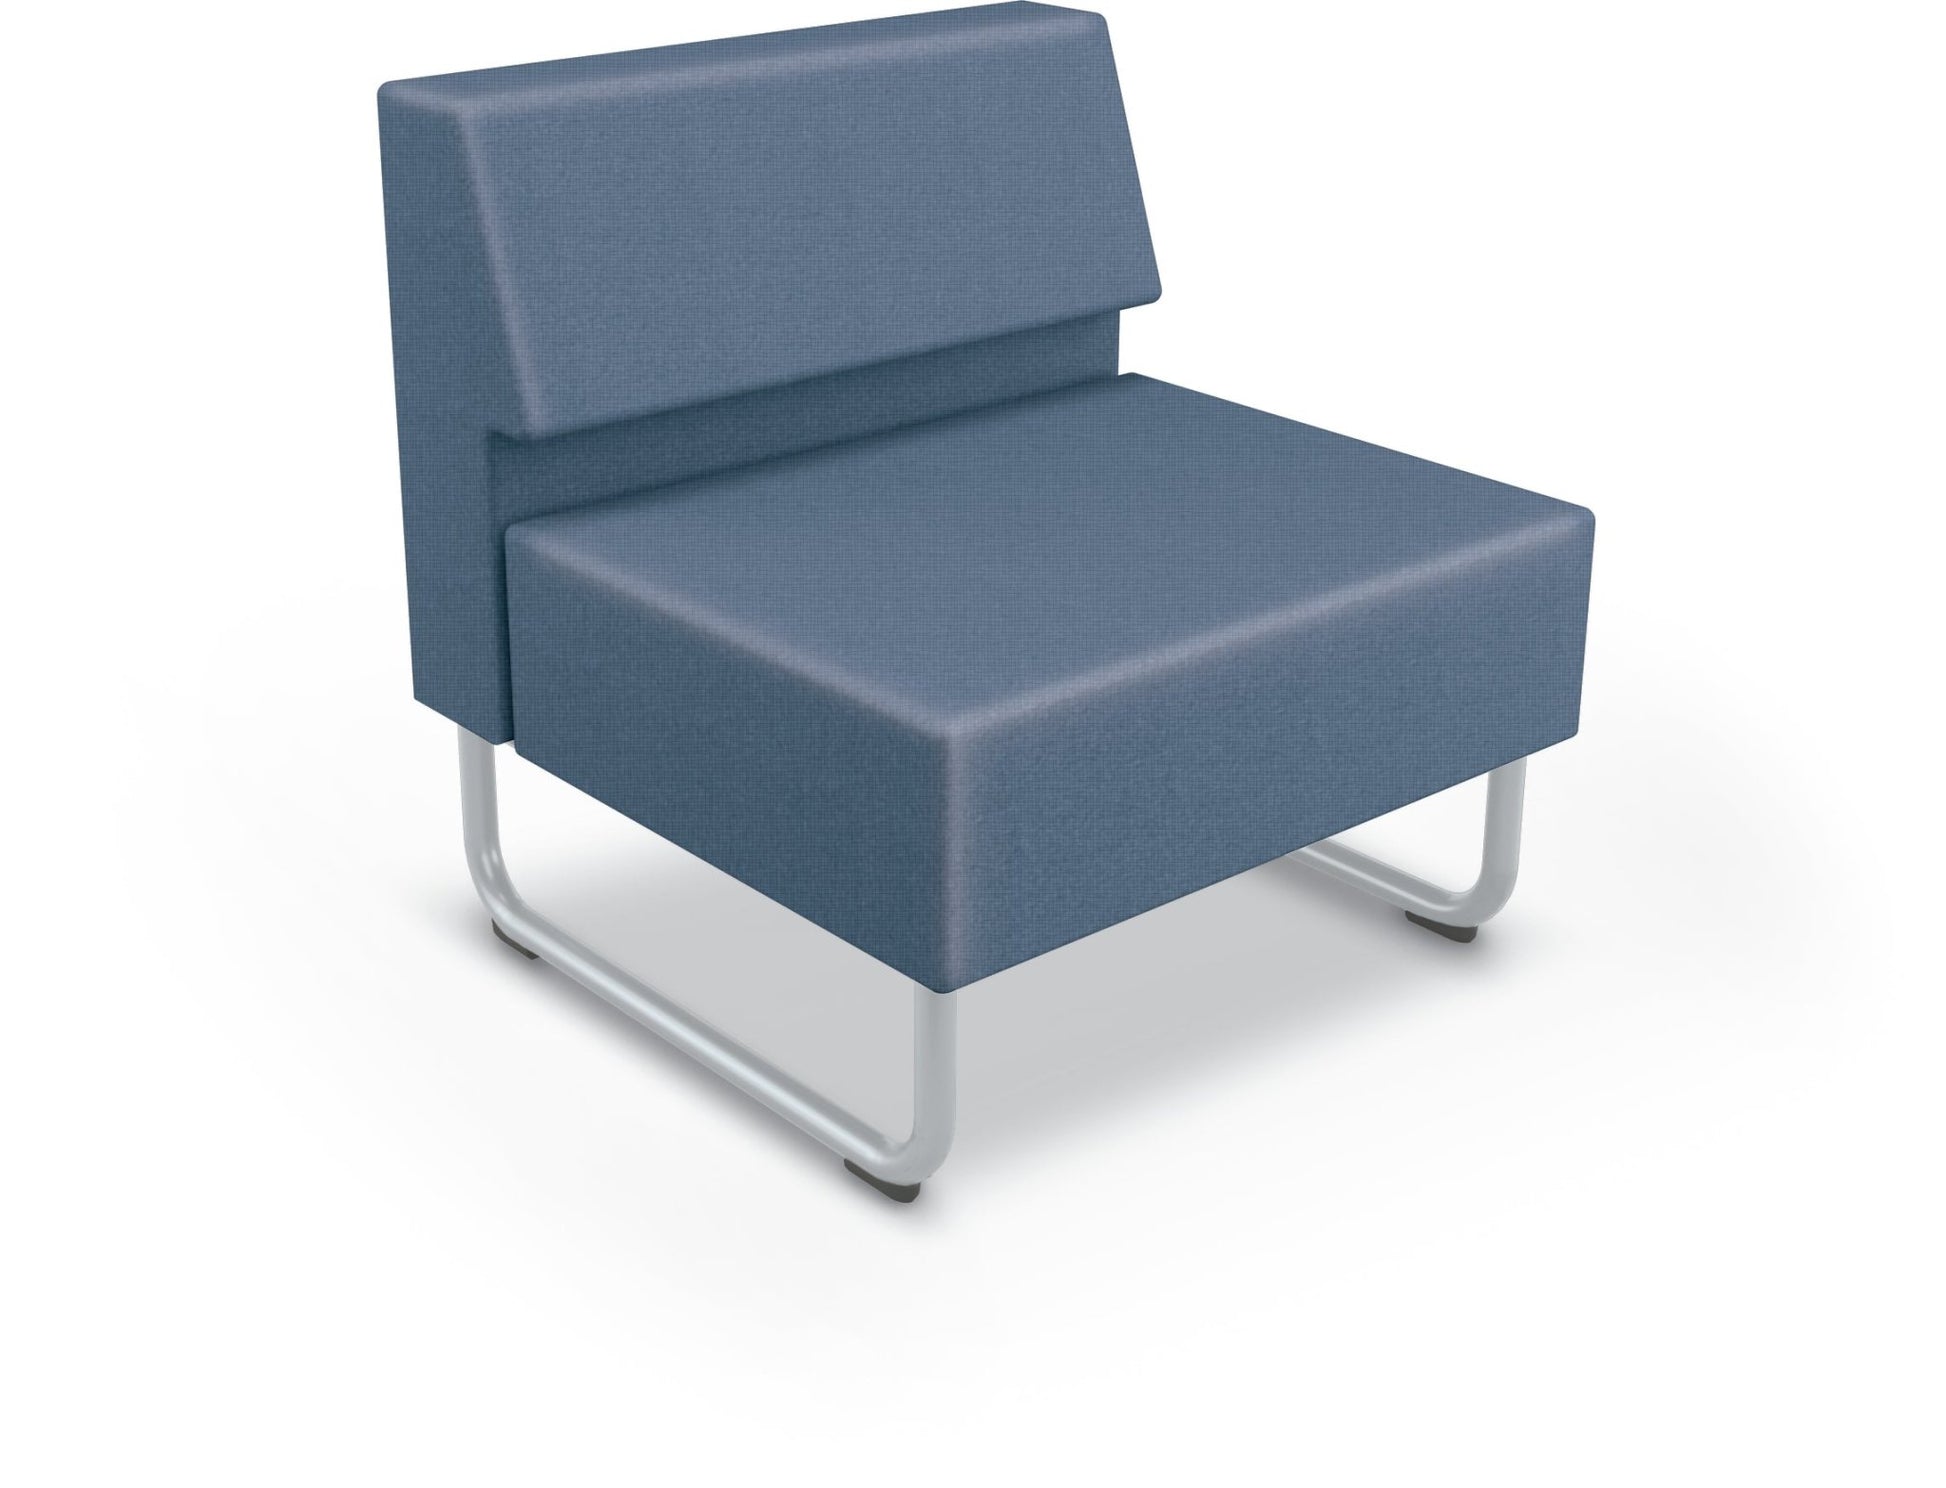 Mooreco Akt Soft Seating Lounge Chair - Armless - Grade 02 Fabric and Powder Coated Sled Legs - SchoolOutlet